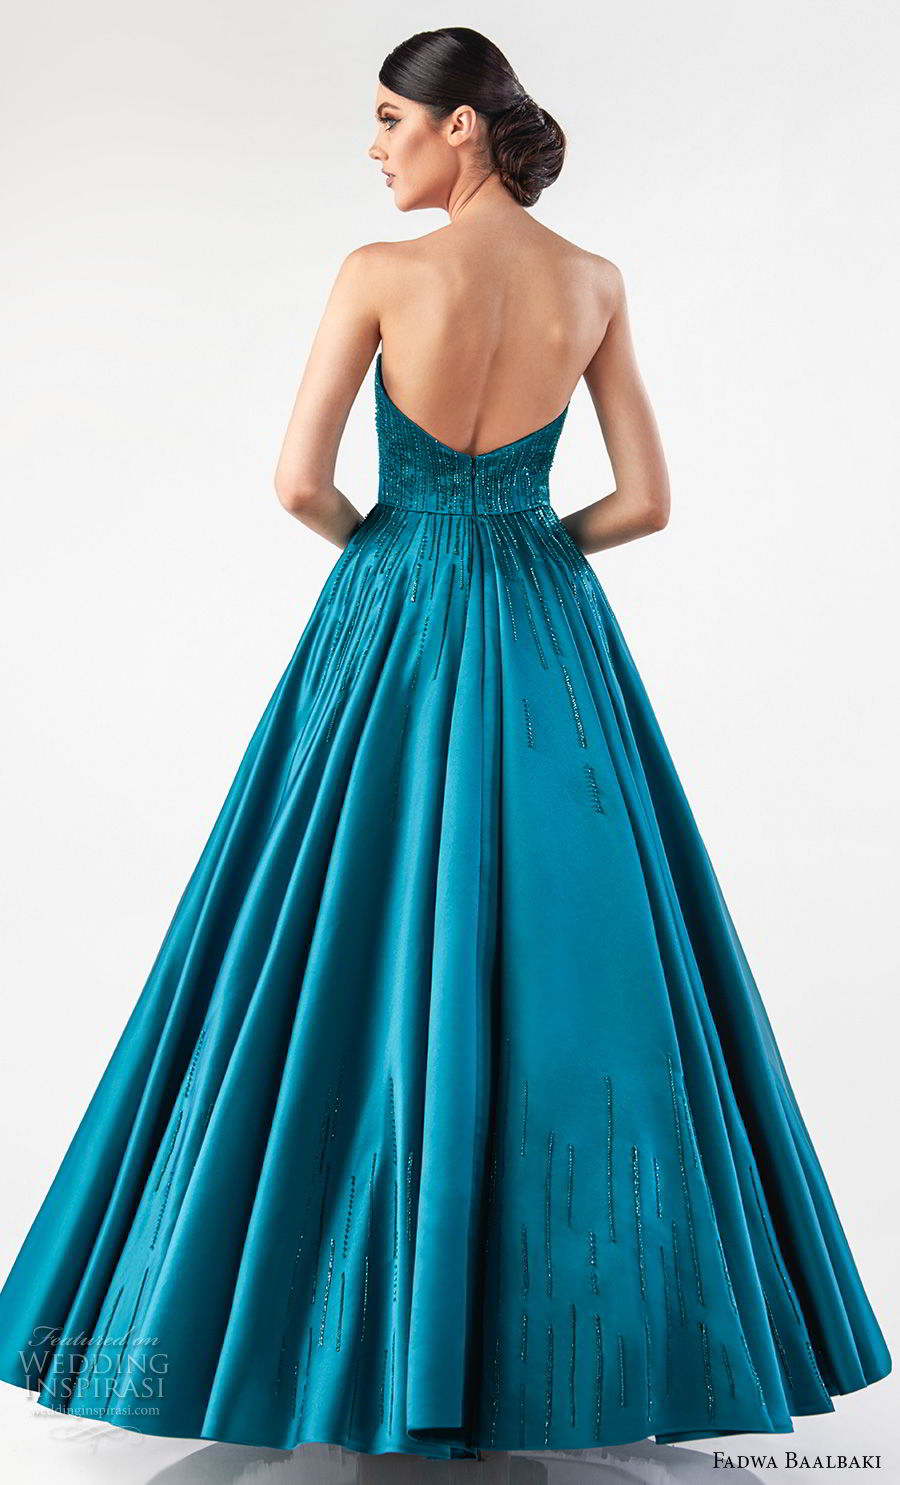 fadwa baalbaki spring 2018 couture strapless sweetheart neckline heavily embellished bodice glamorous teal a  line wedding dress with pockets (9) bv